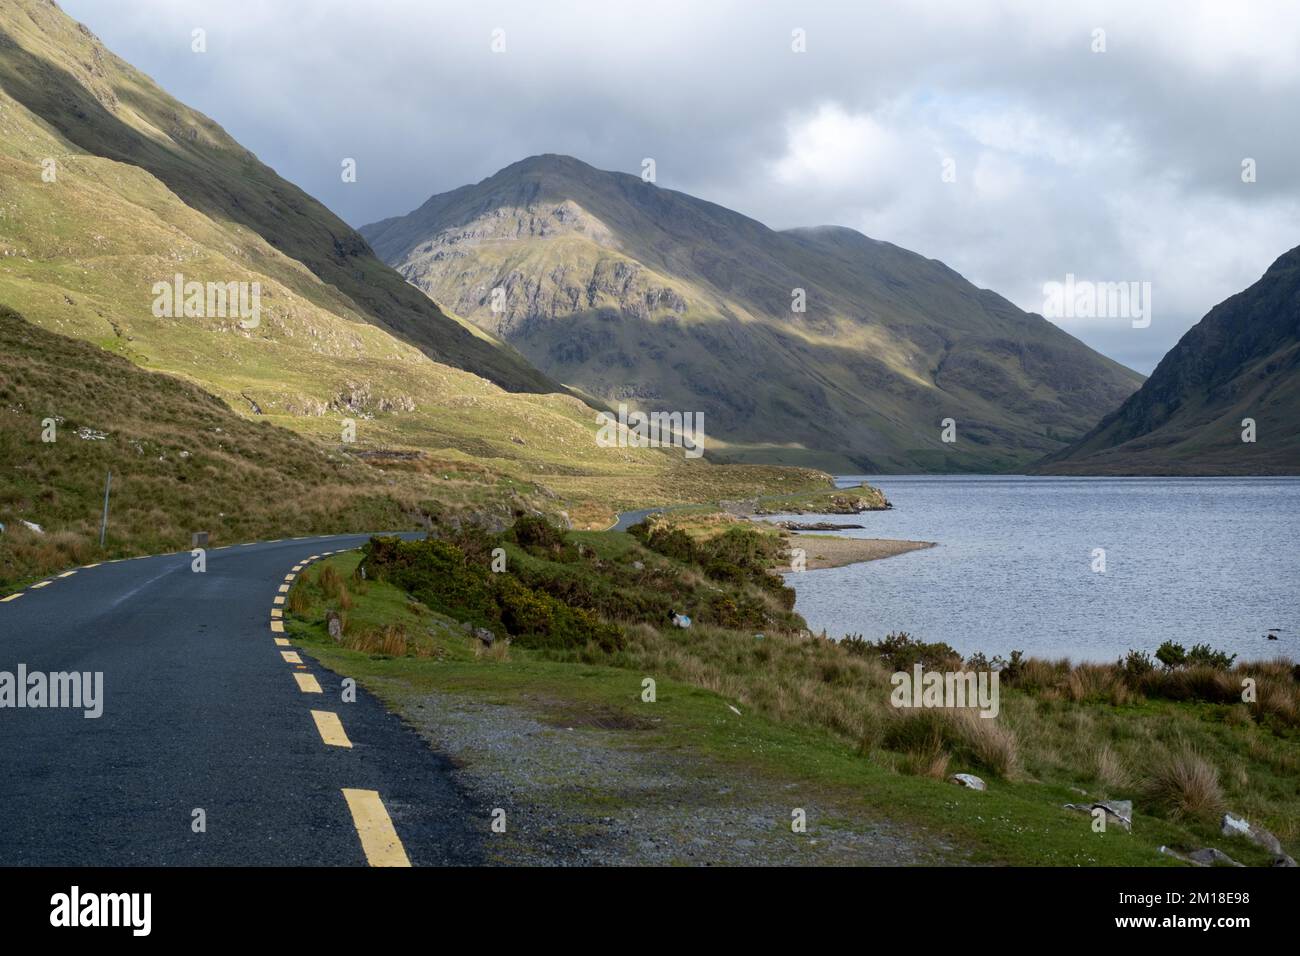 Ireland, Doolough Valley. Daylight shot with contrast between the yellow road and mountains. Wild Atlantic way. Stock Photo